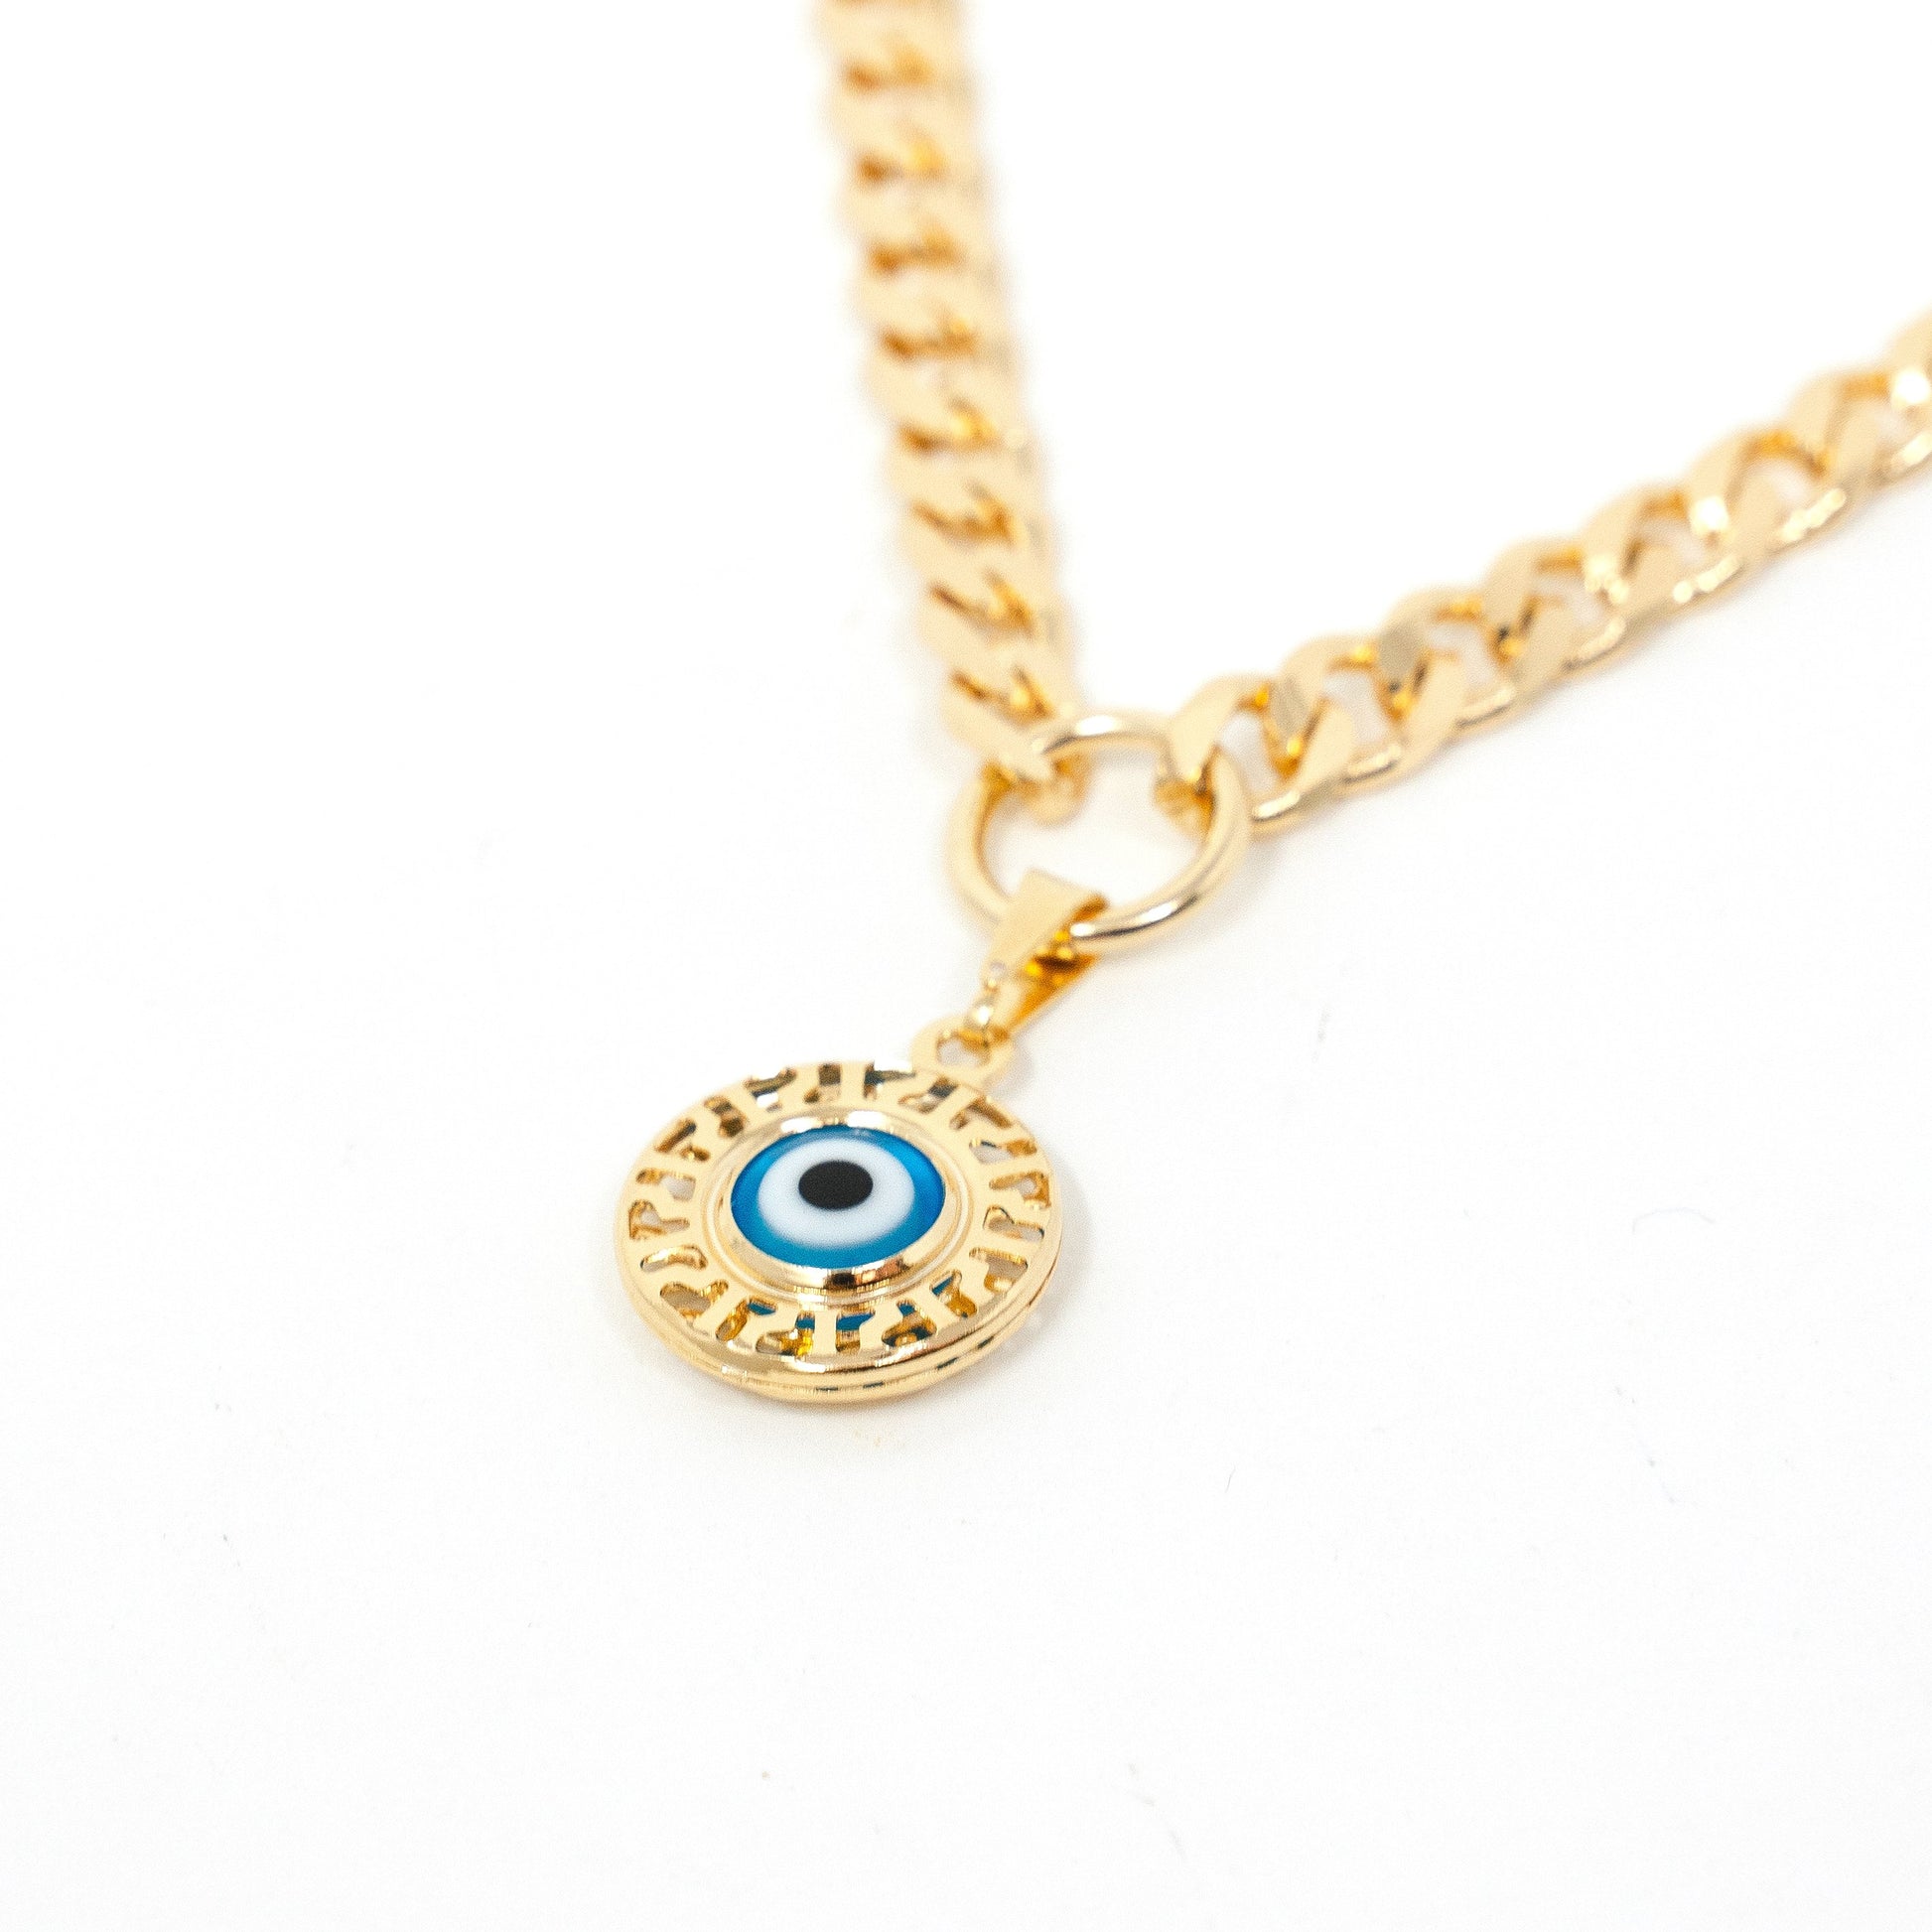 Cuban Chain Link Charm Necklaces JEWELRY The Sis Kiss Evil Eye